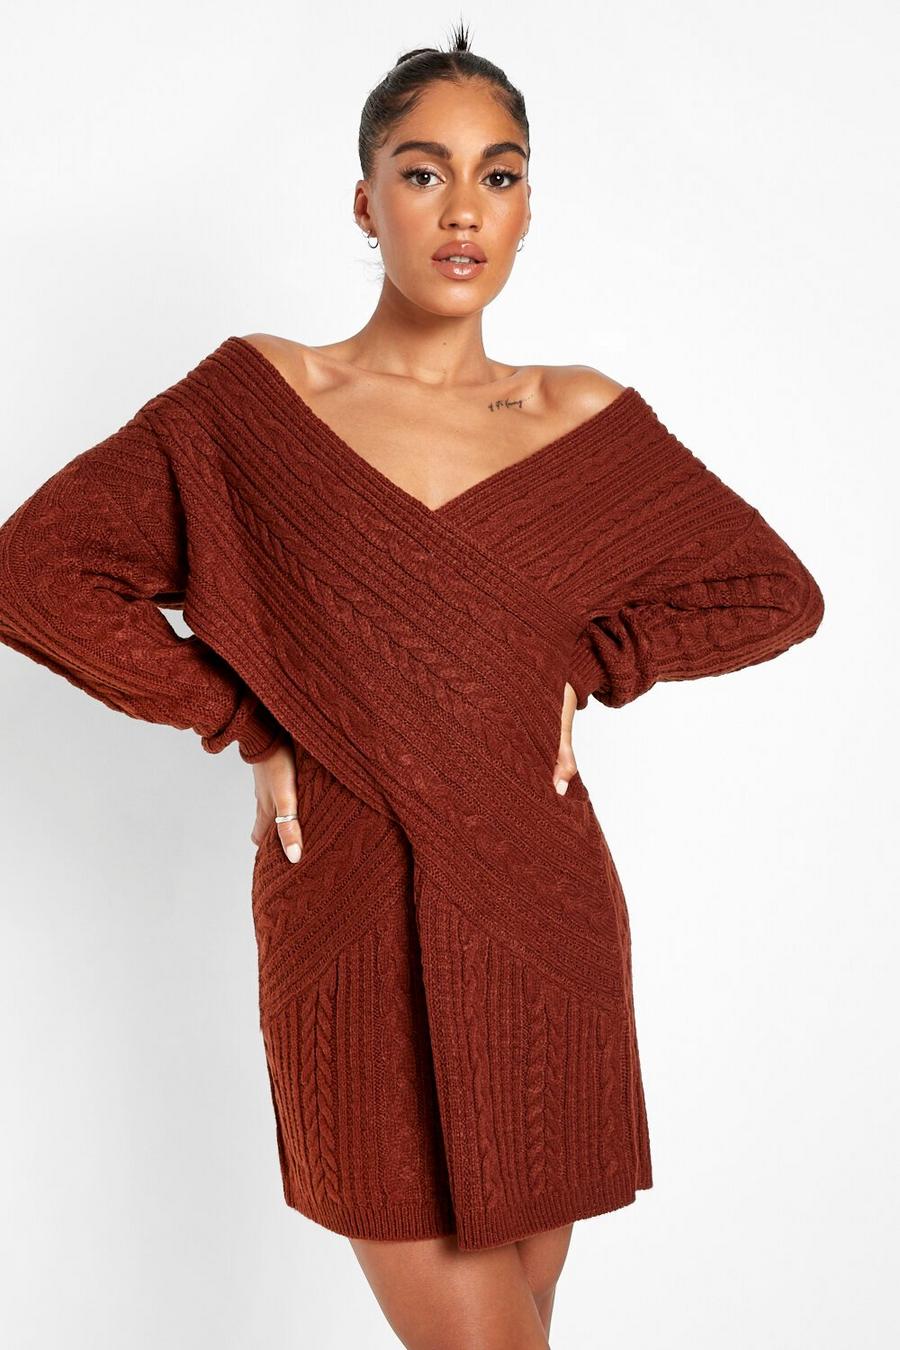 Mahogany marron Off The Shoulder Cable Knitted Jumper Dress